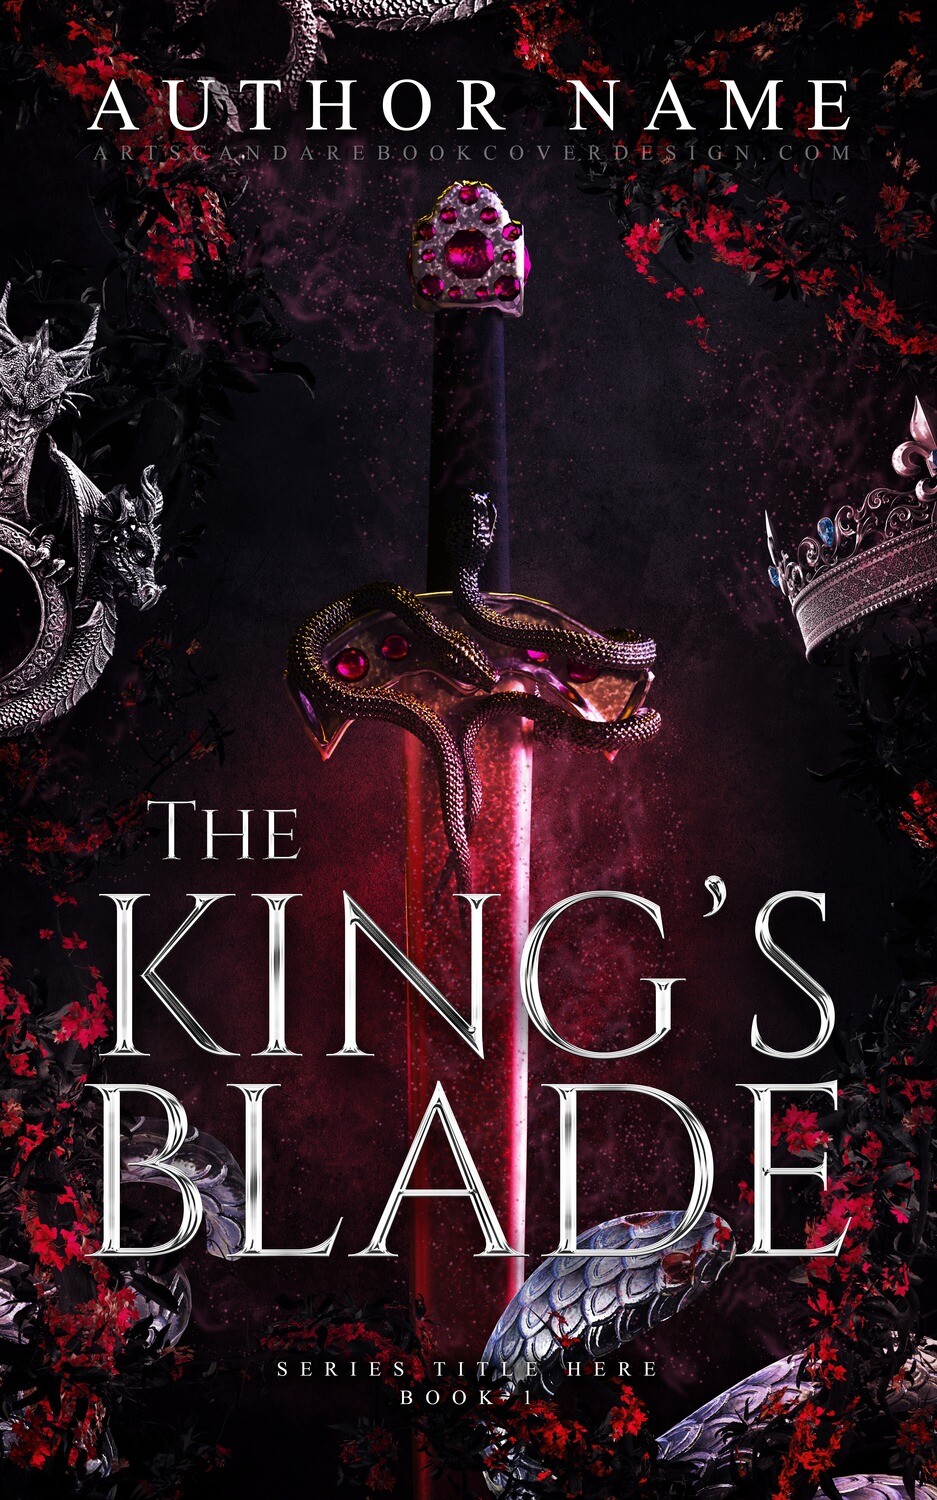 THE KING'S BLADE